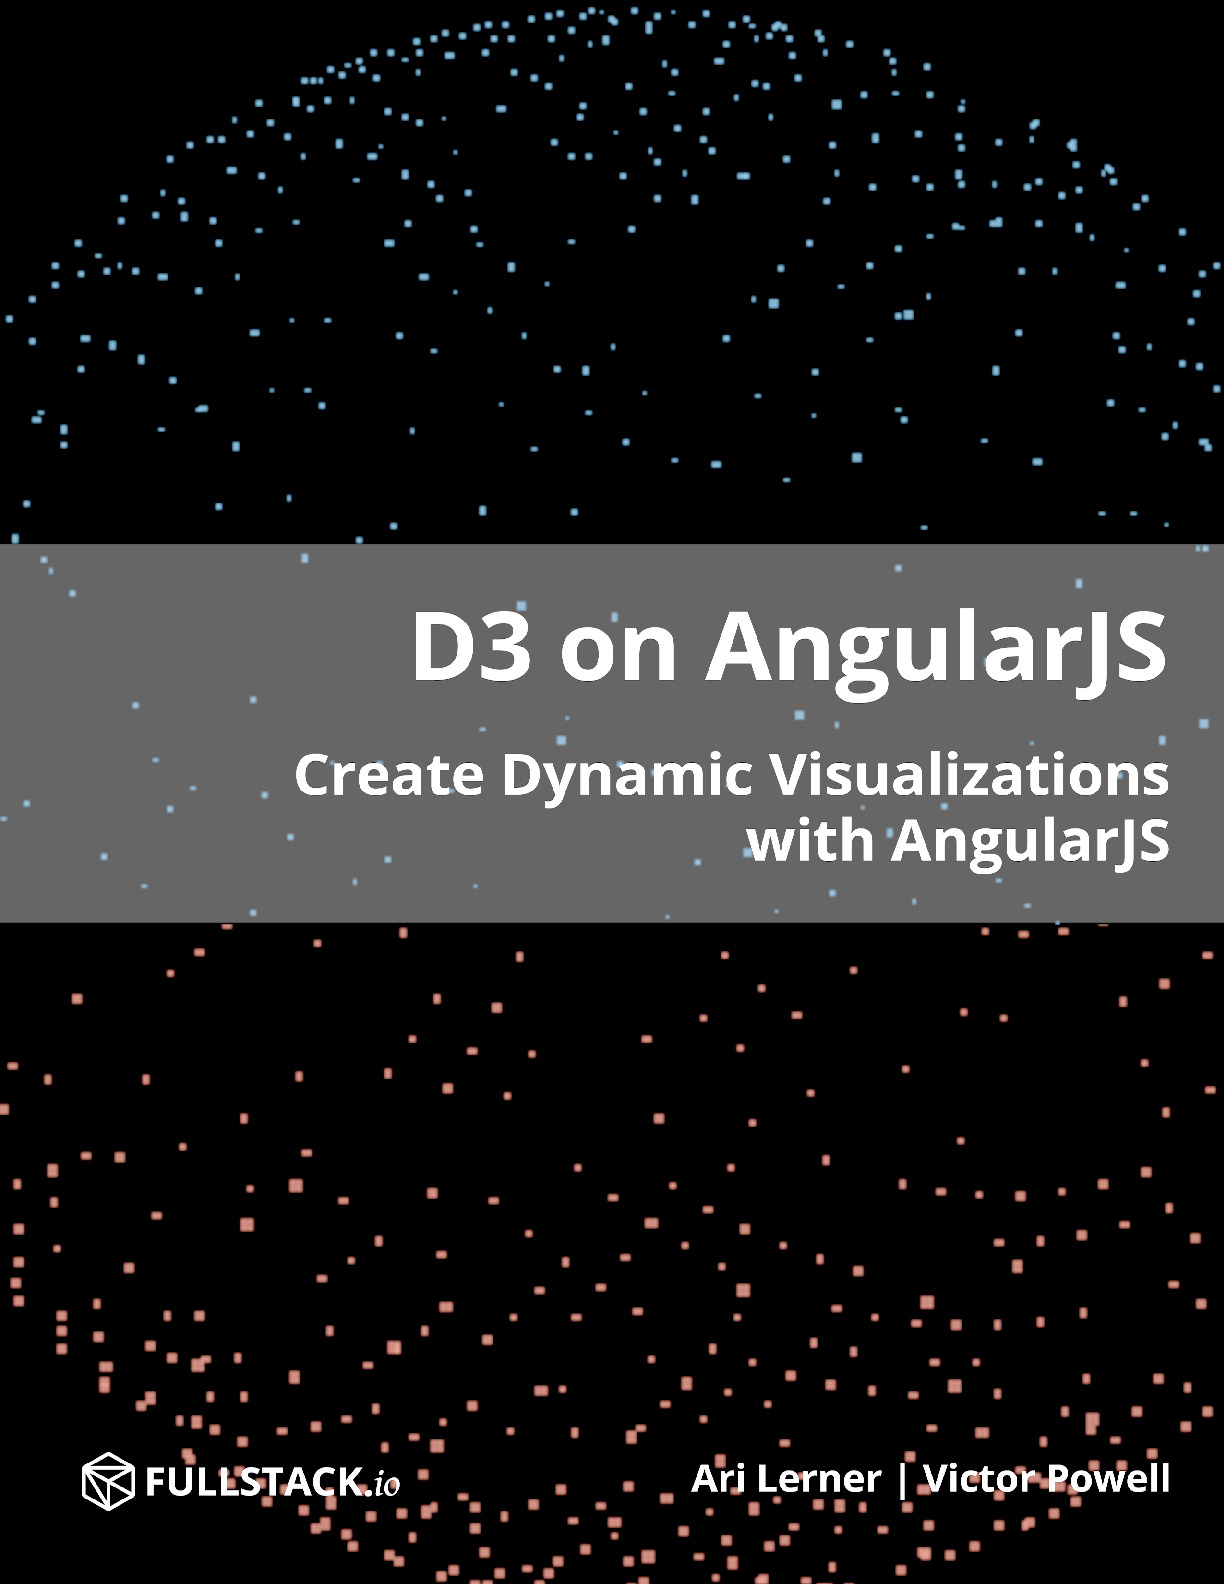 d3-on-angularjs-create-dynamic-visualizations-with-angularjs-by-ari-lerner-victor-powell